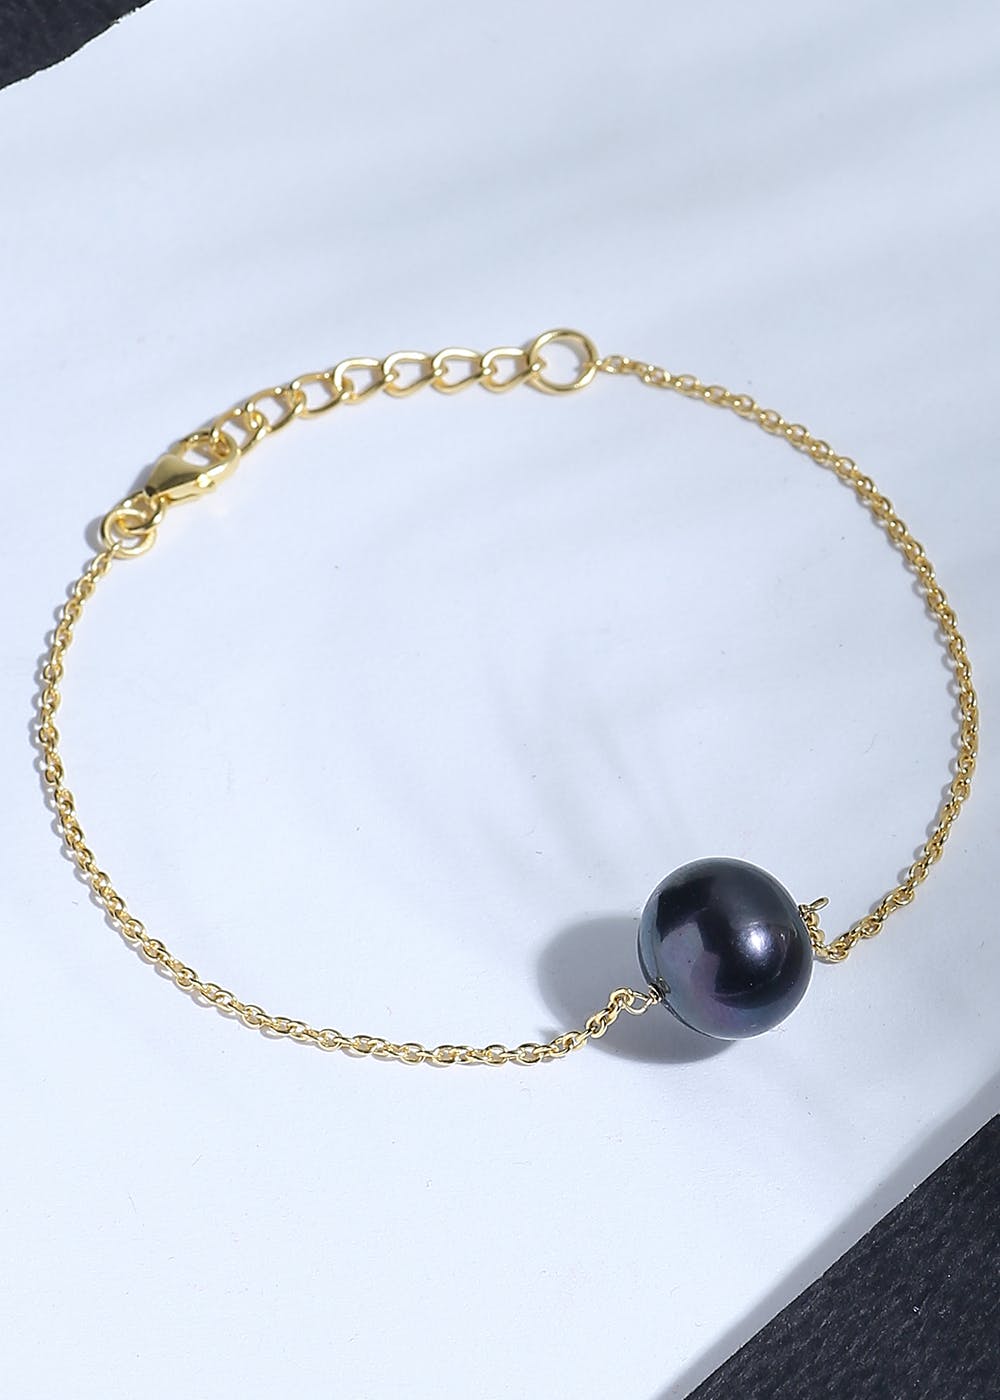 10mm Simulated Black Pearl Bracelet Made with India  Ubuy